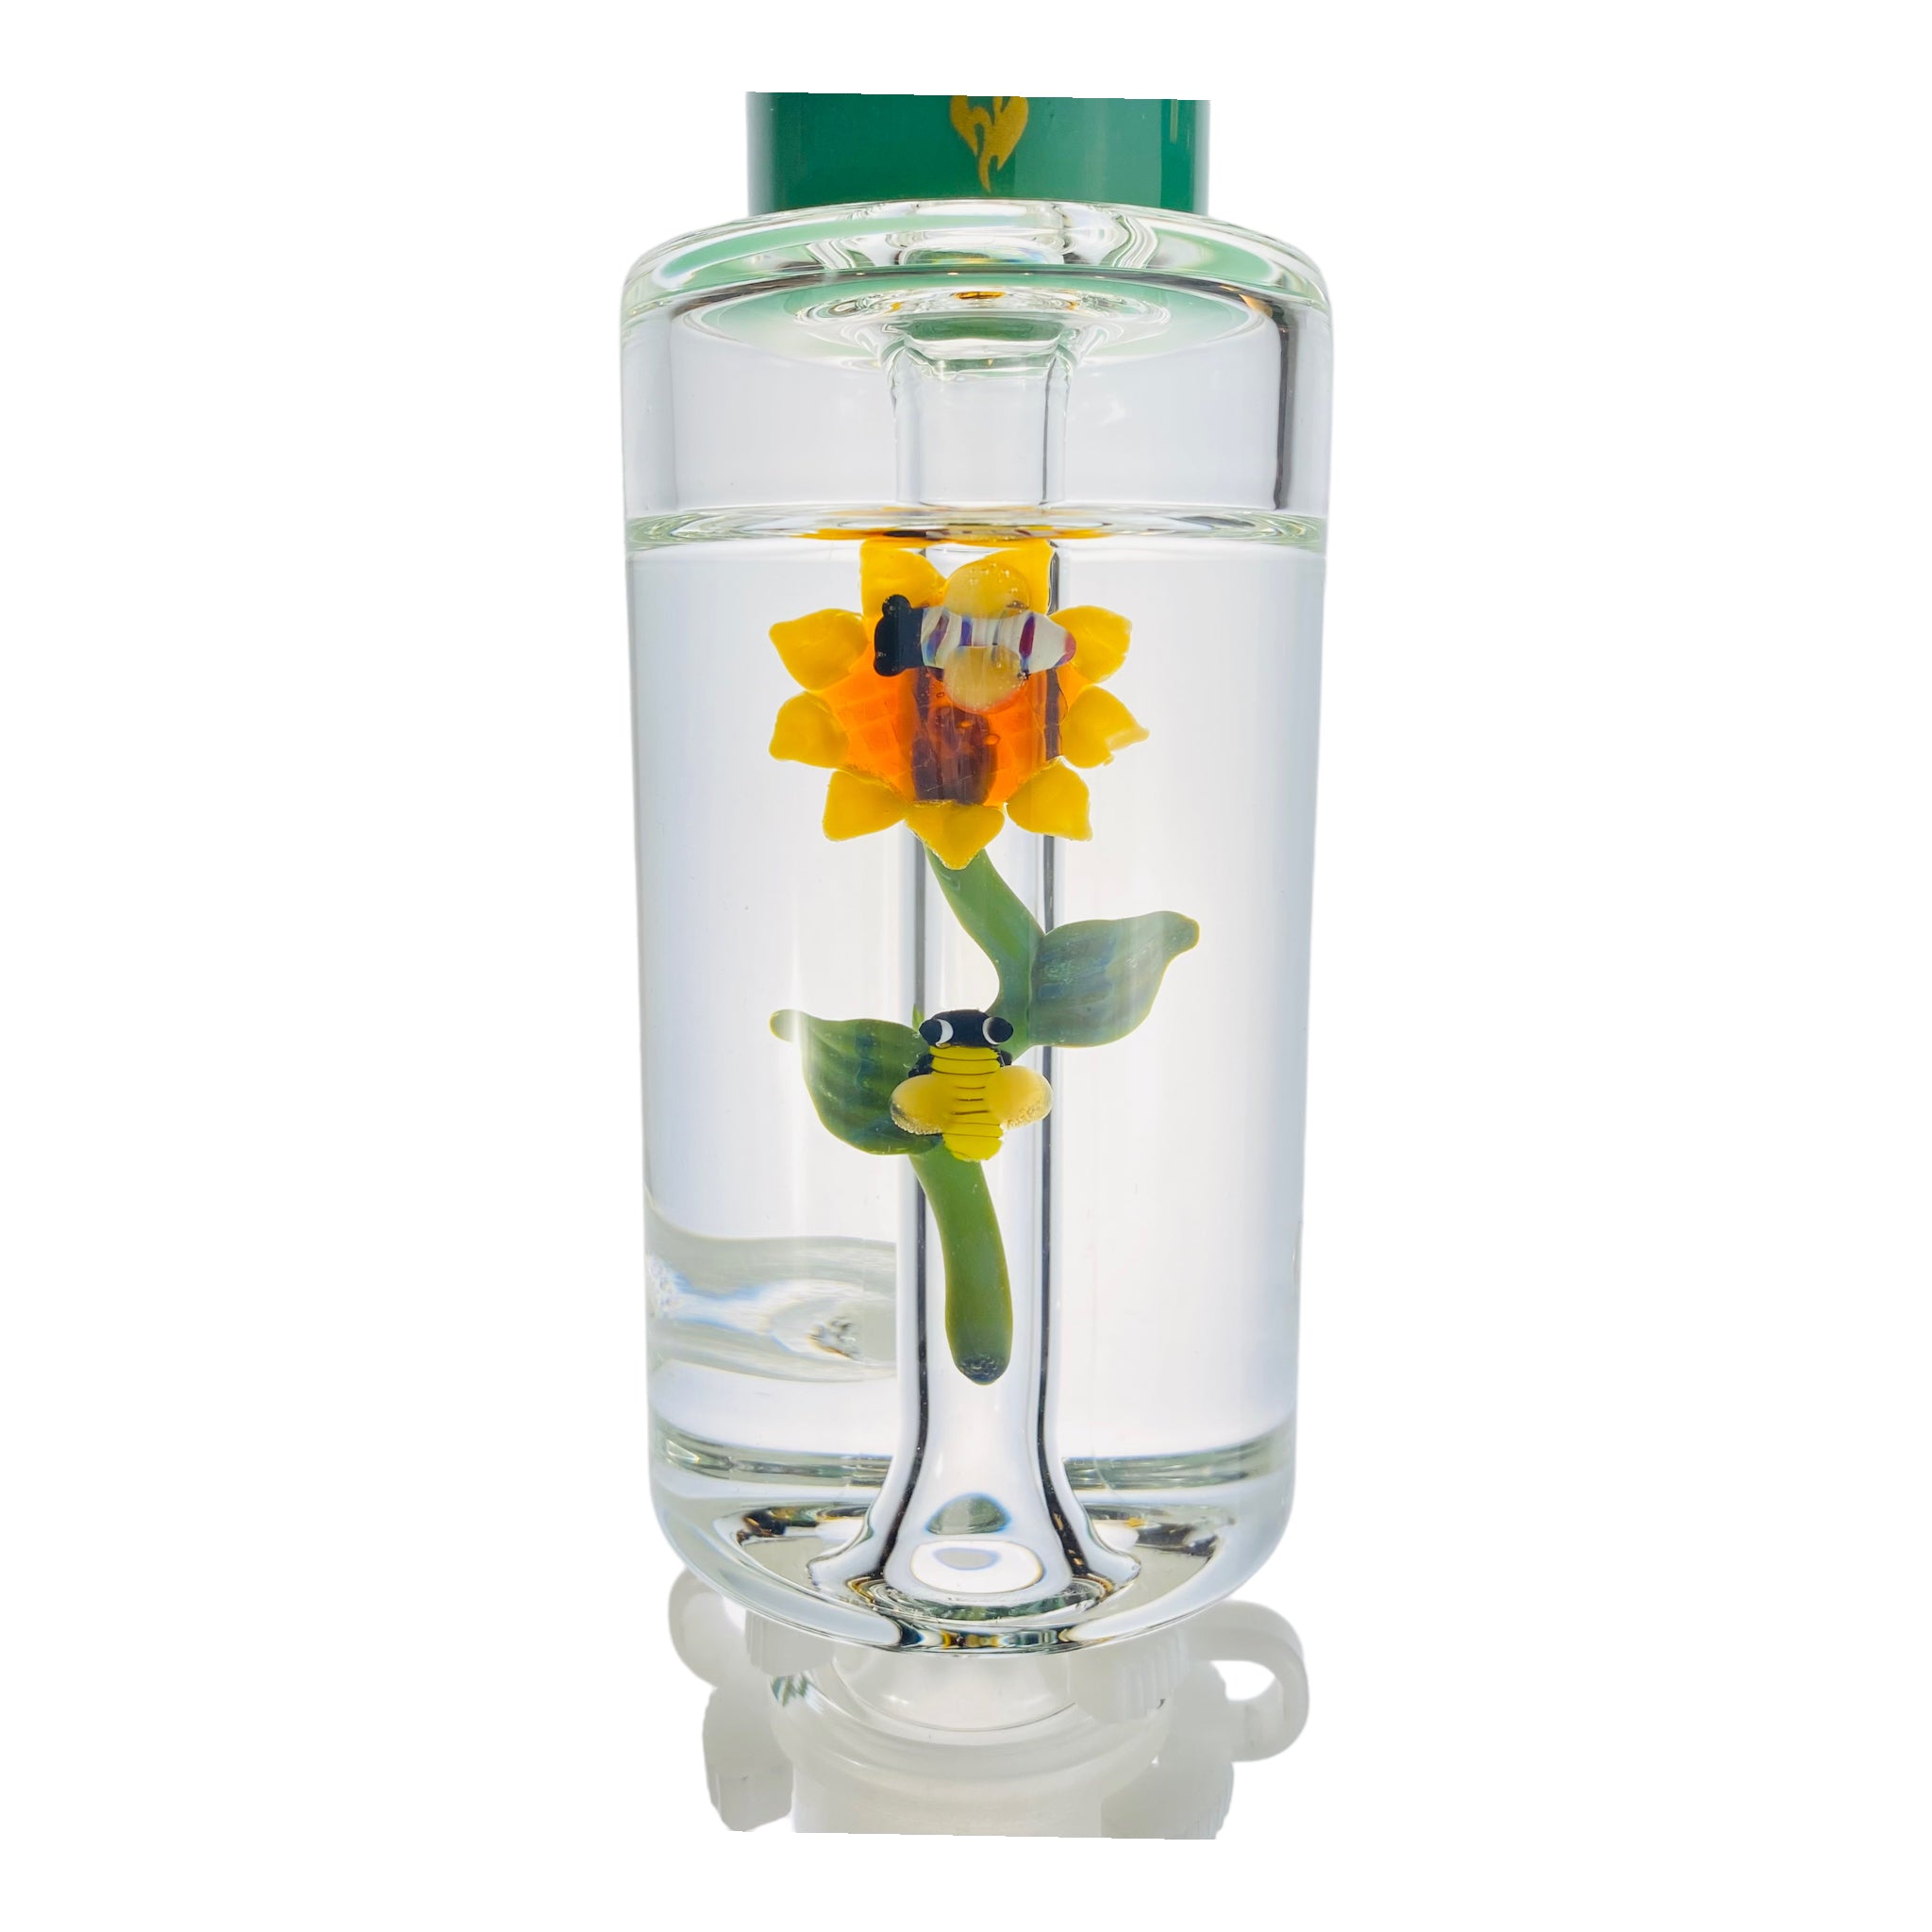 Apollo Glass - Large Sunflower Garden With Bees Glass Bong With Glycerin Freeze Coil TopApollo Glass - Large Sunflower Garden With Bees Glass Bong With Glycerin Freeze Coil Top